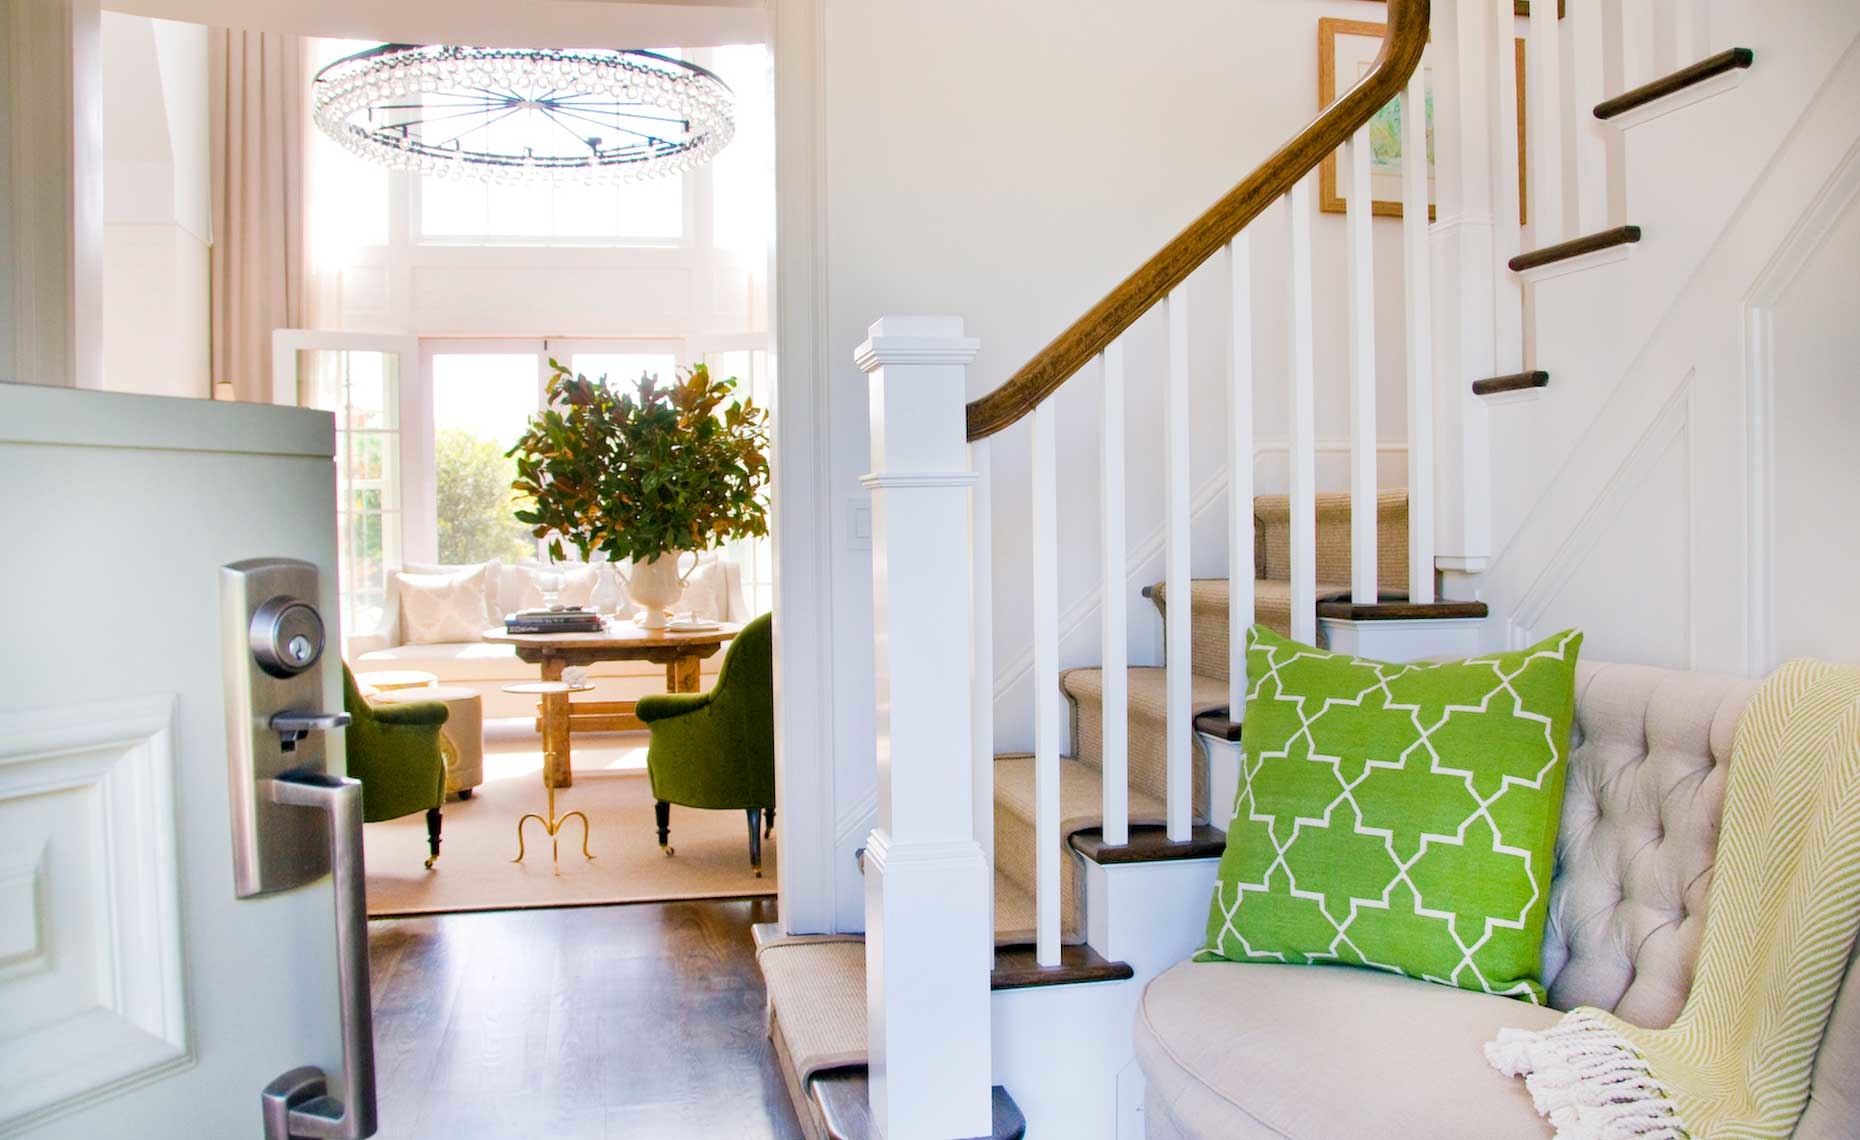 A beautiful, updated living room with a clean, white staircase and modern decor.